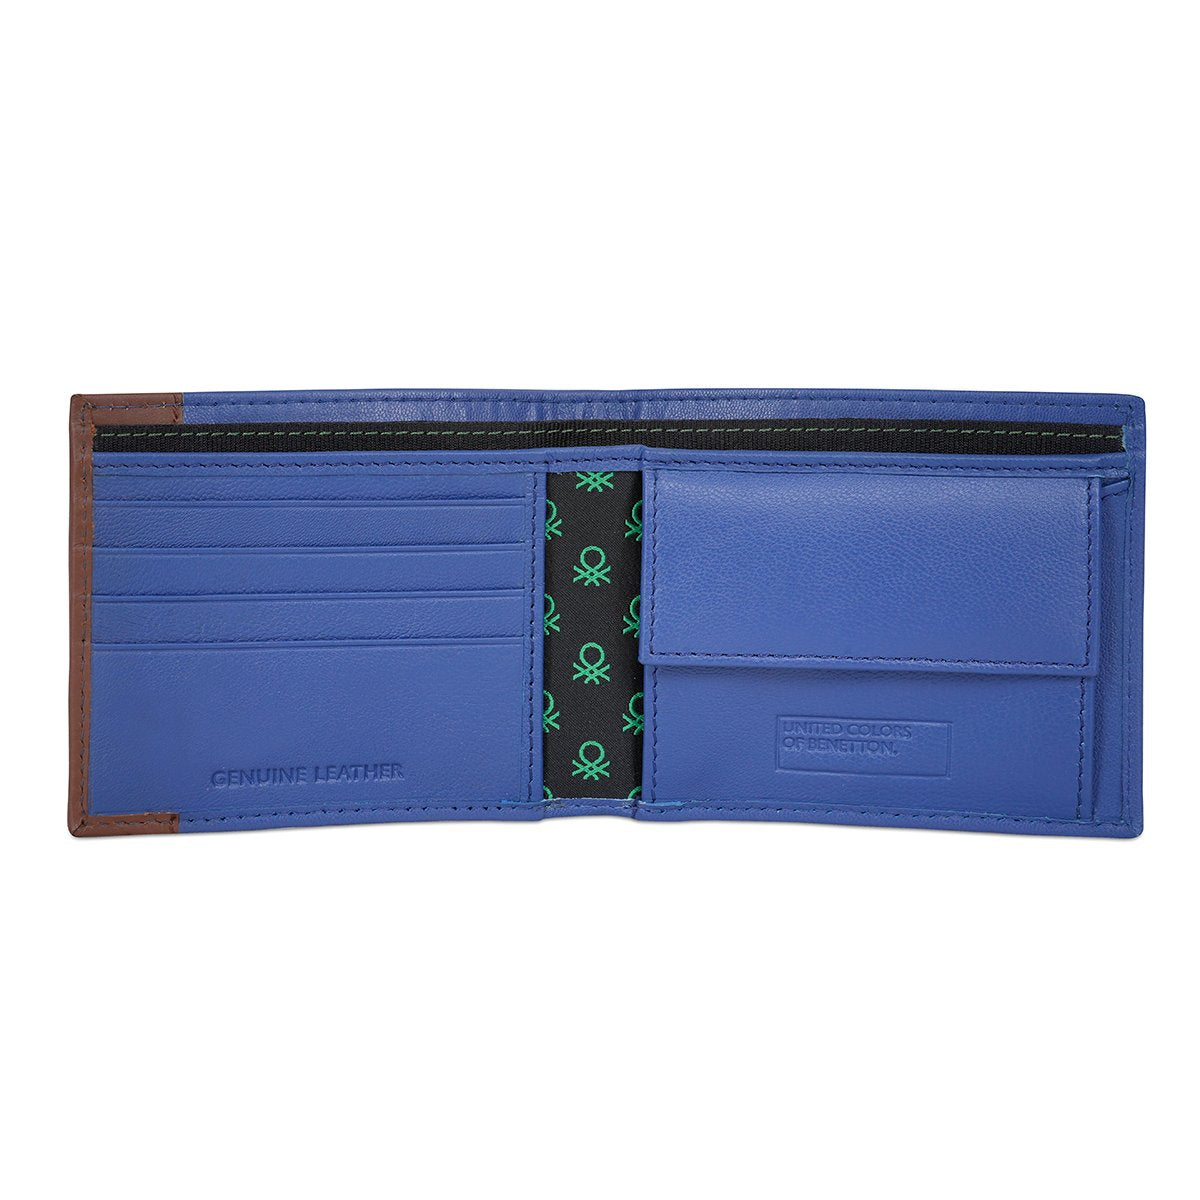 Copy of United Colors of Benetton Aroldo Global Coin Wallet Blue